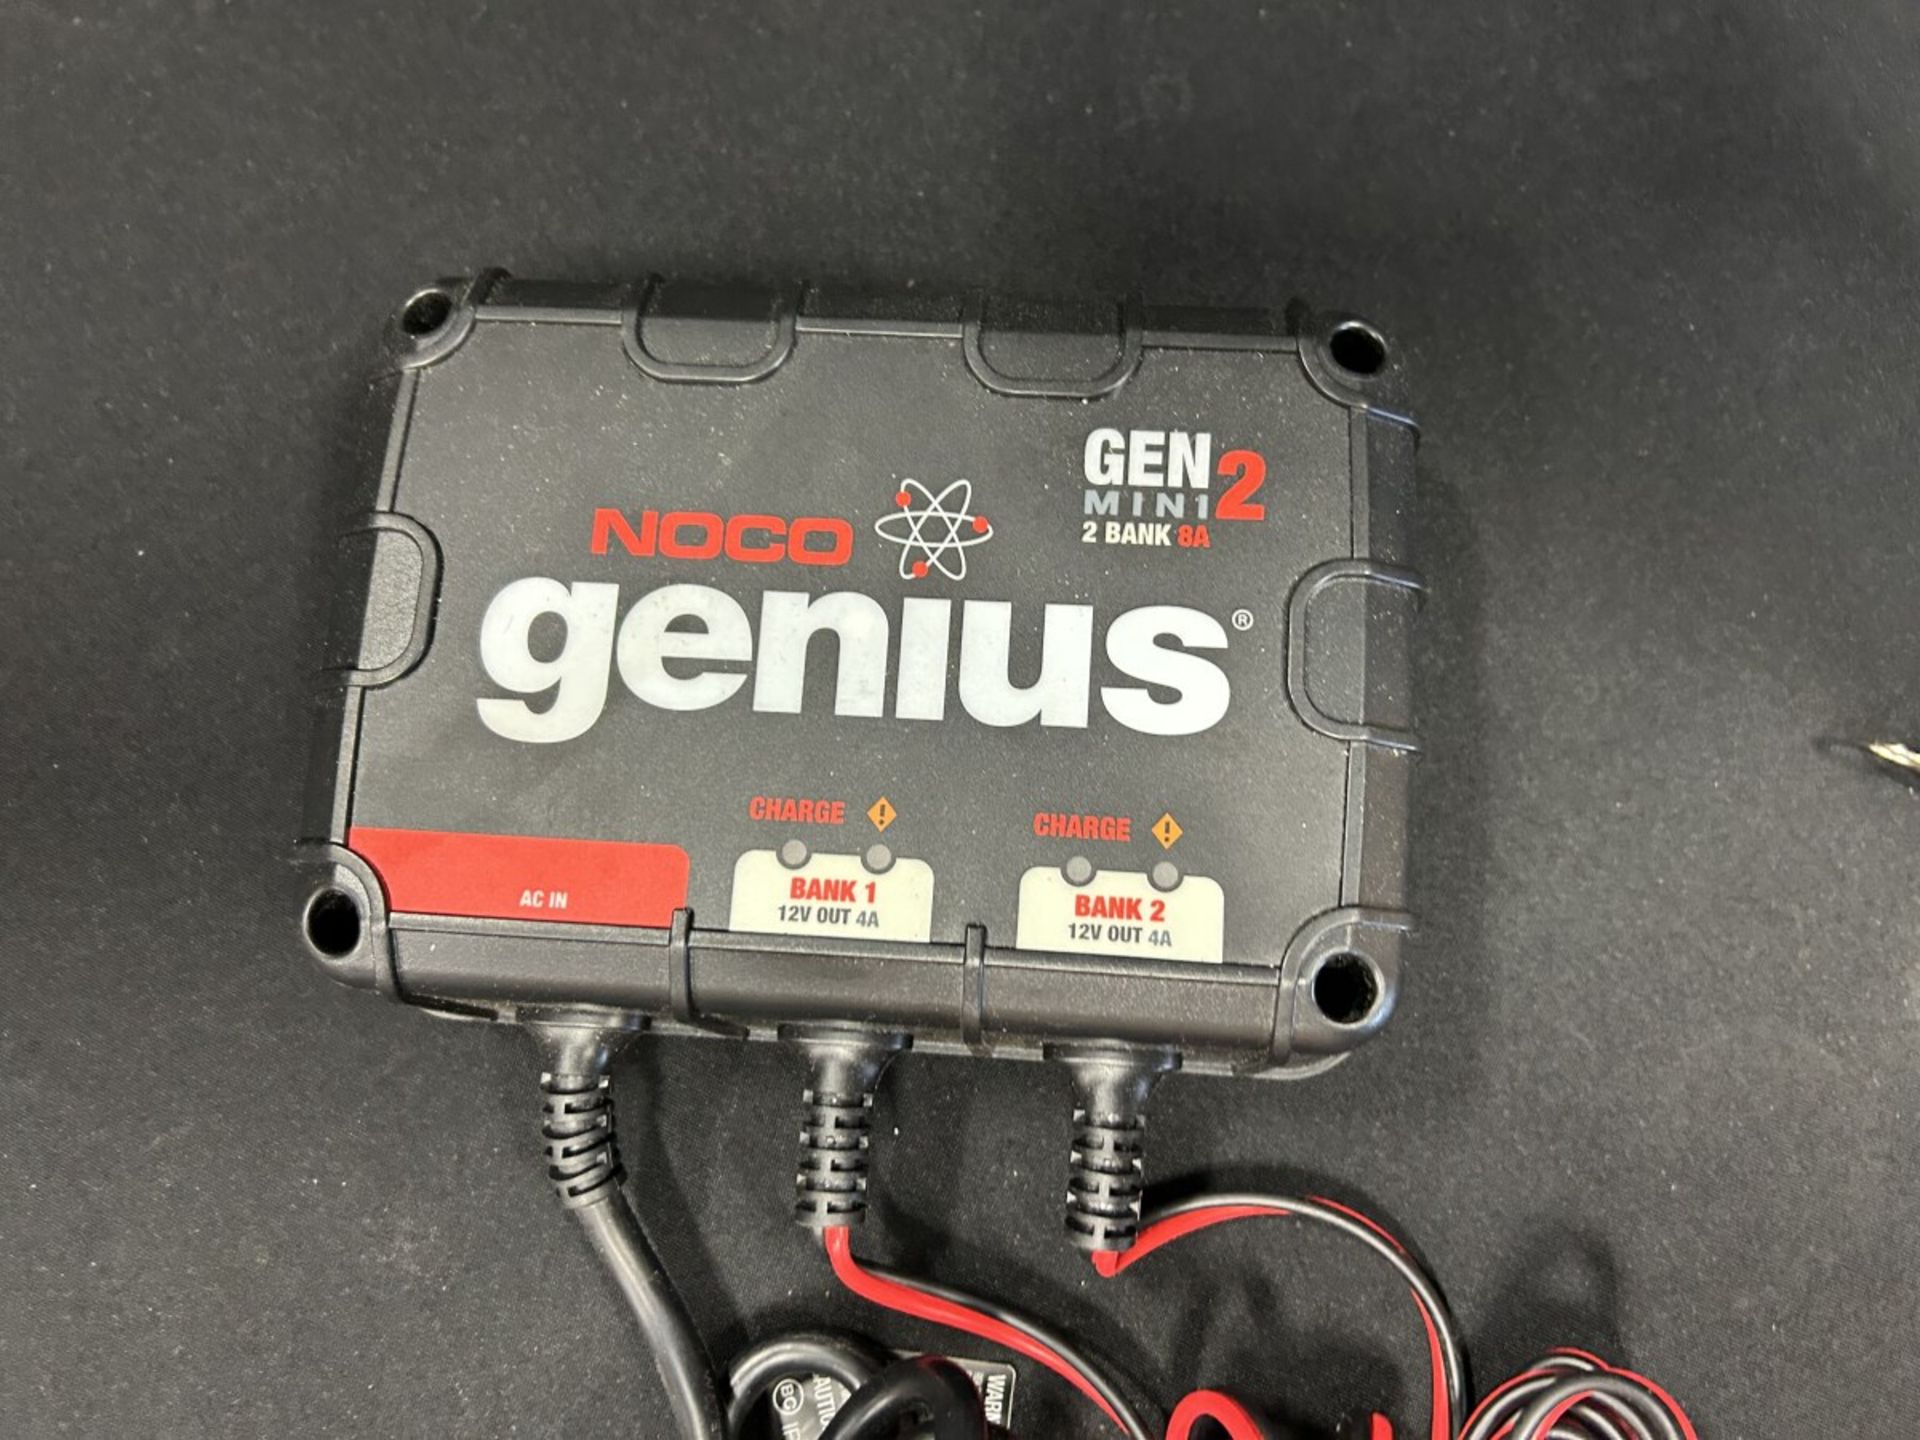 NOCO GENIUS ON-BOARD BATTERY CHARGER - B41 - Image 4 of 7